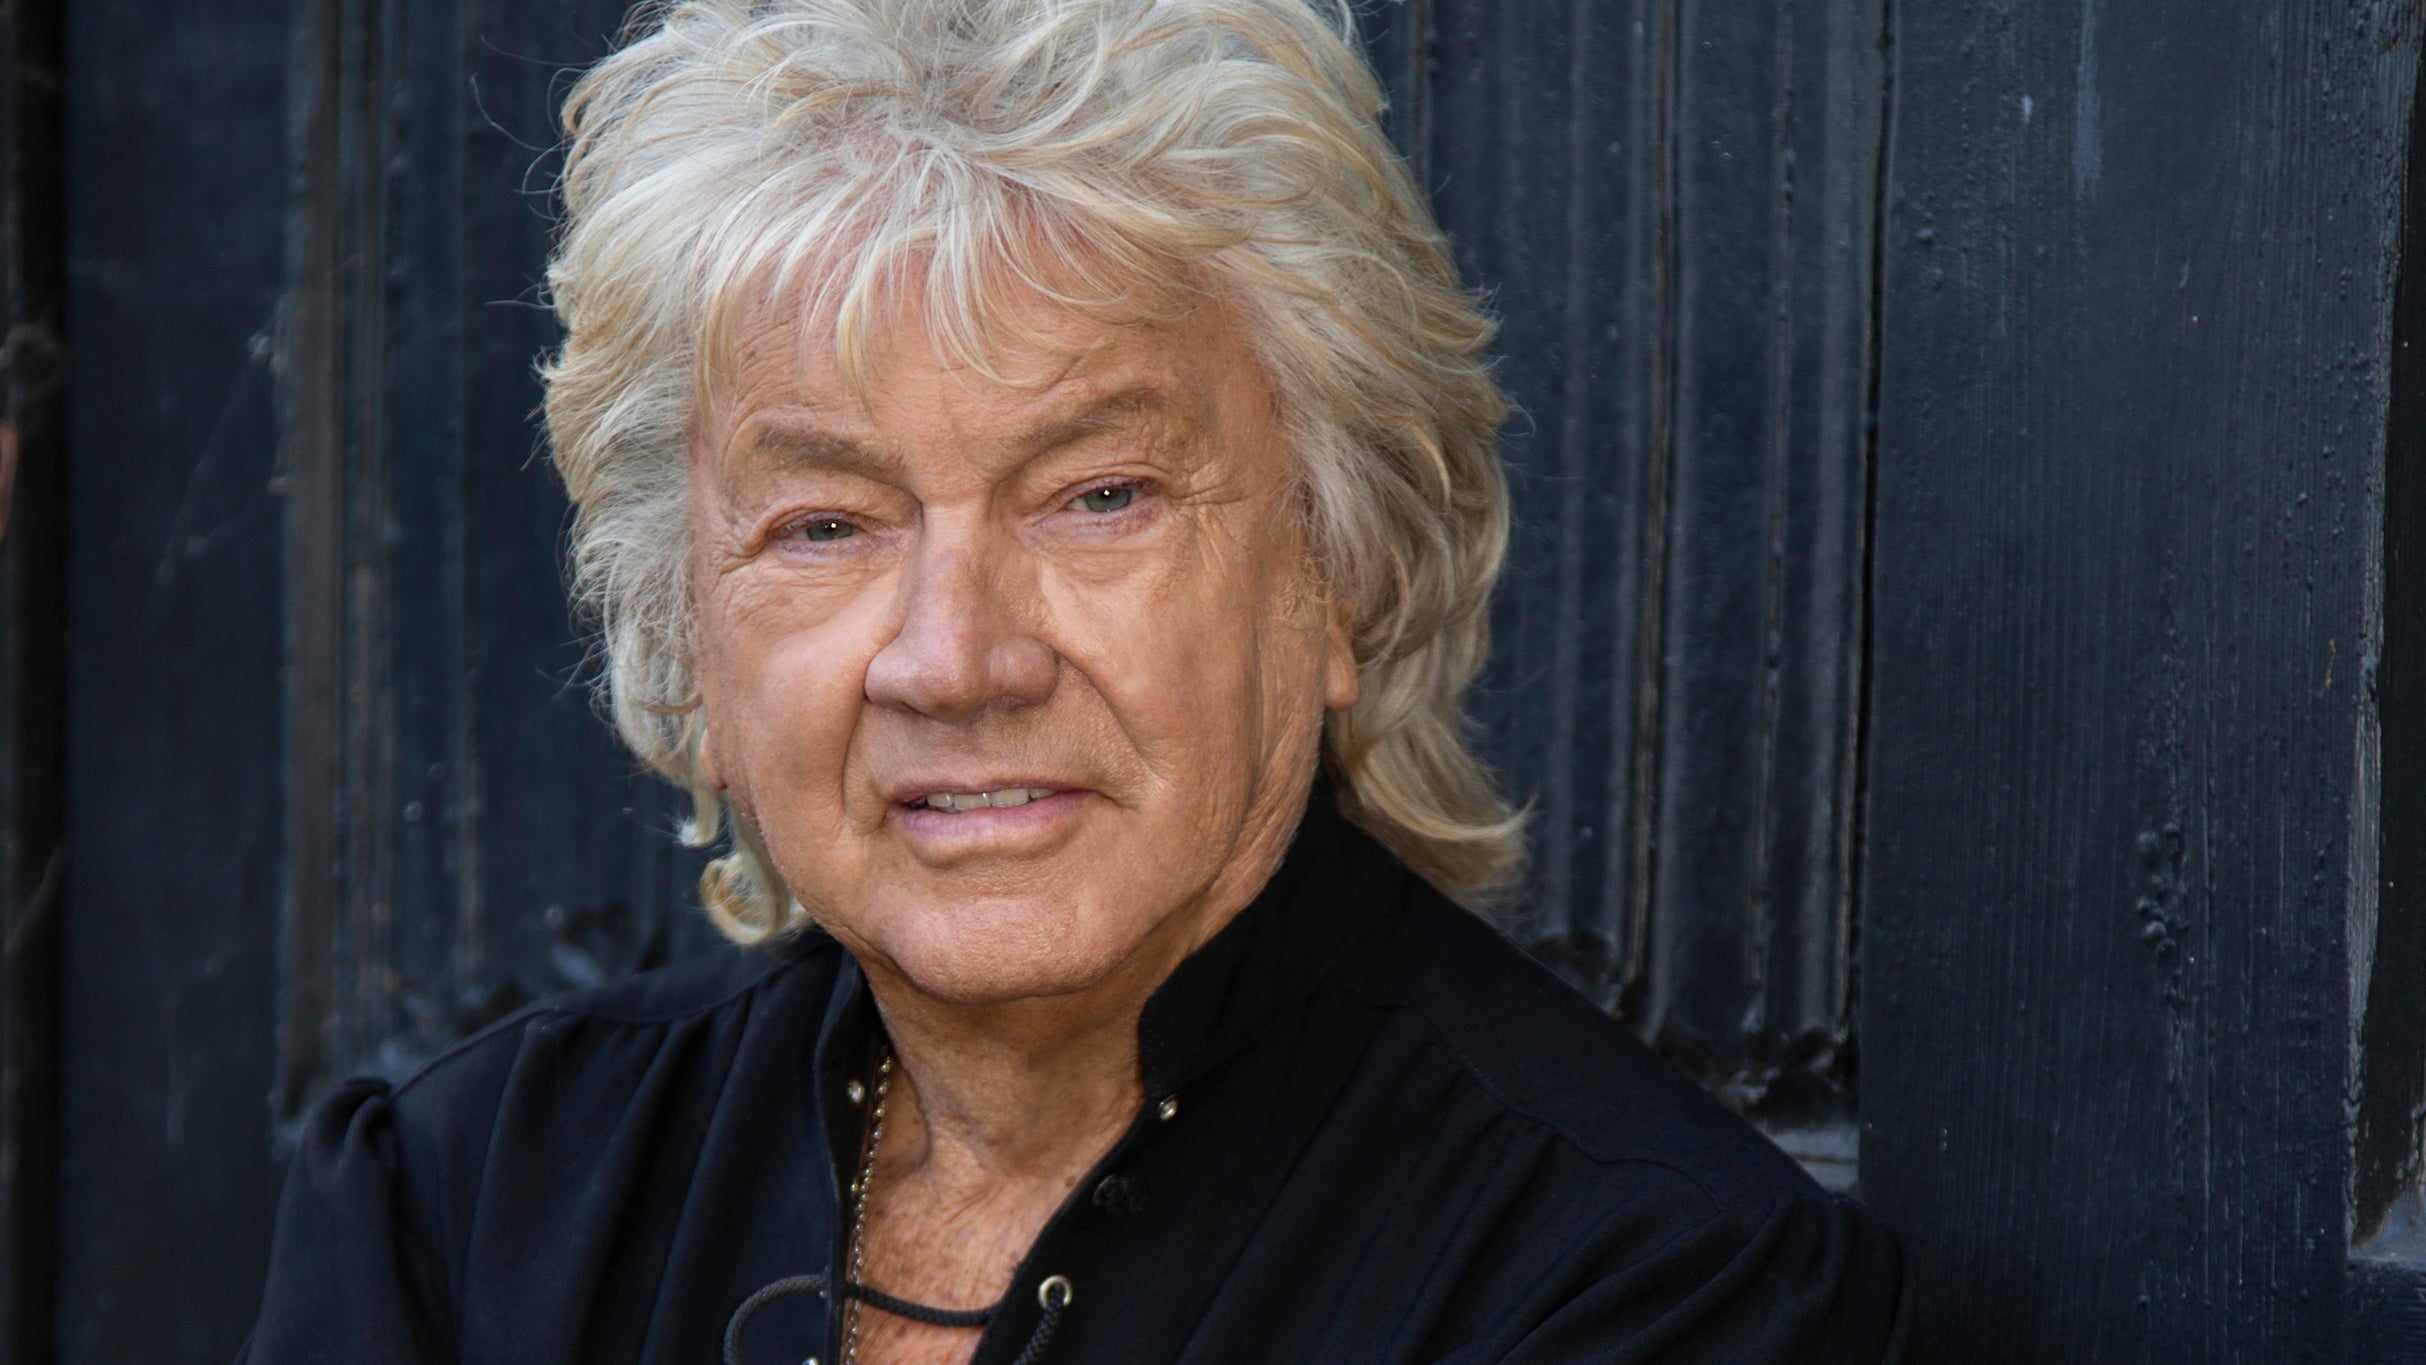 The Moody Blues' John Lodge in Ft Lauderdale promo photo for Venue presale offer code